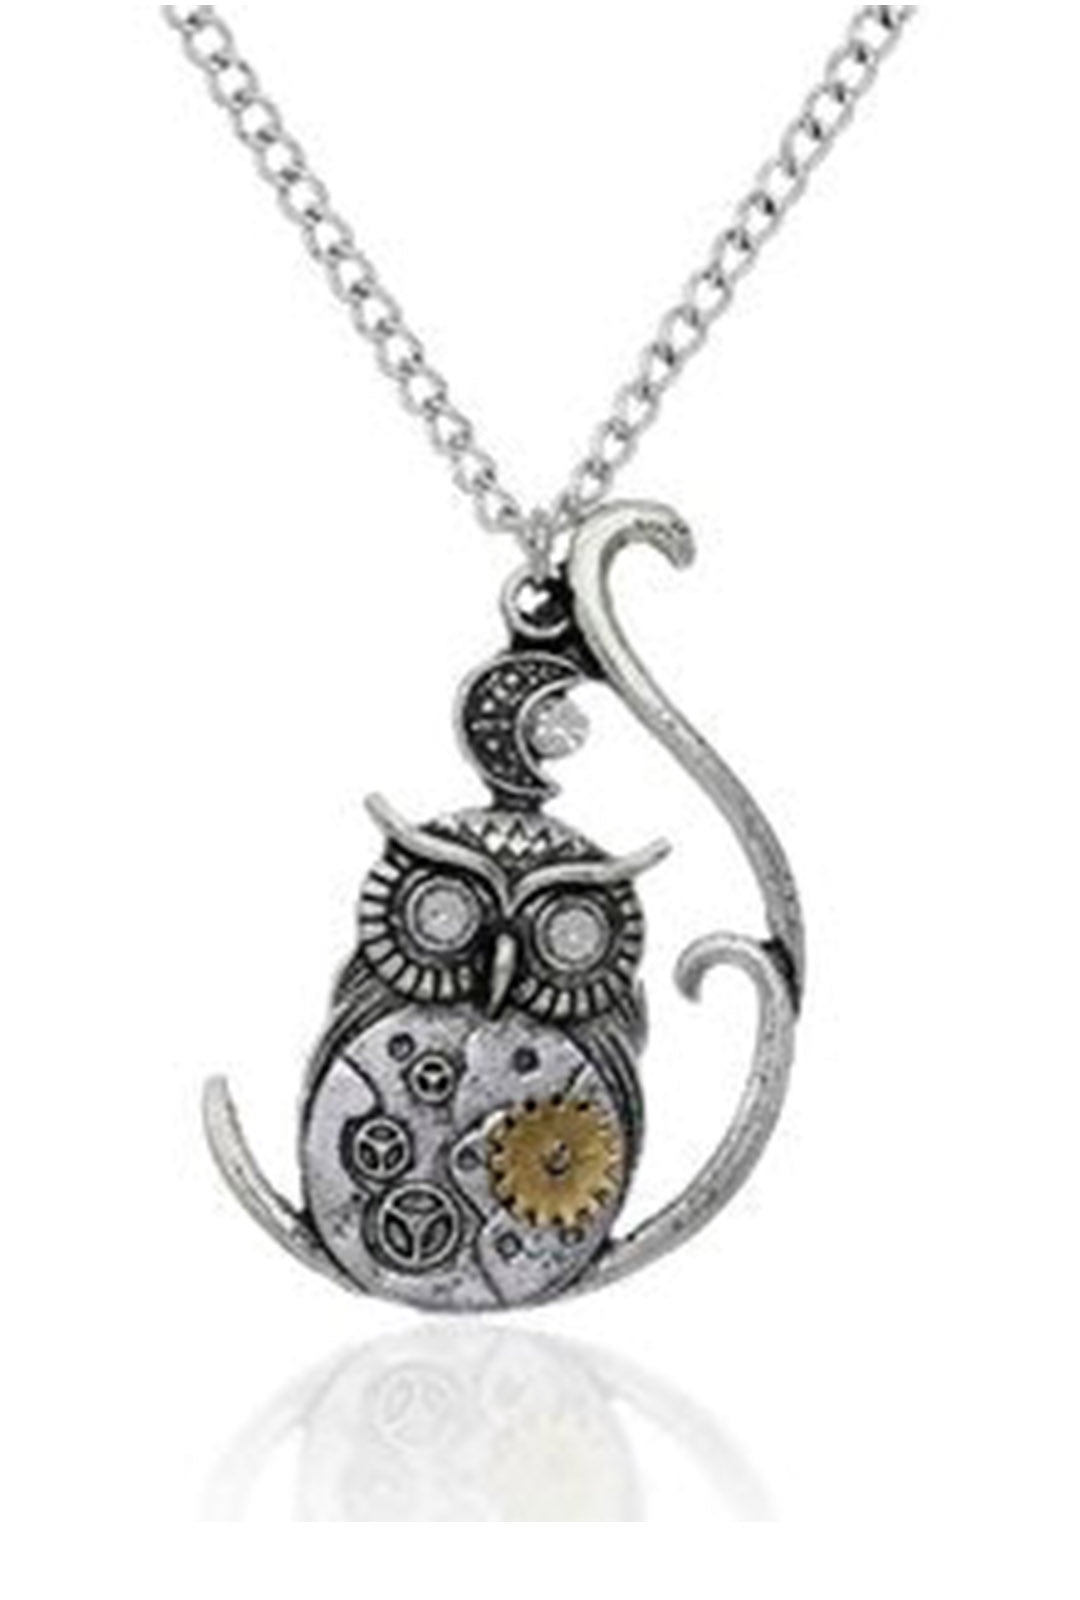 Steampunk Silver Owl Necklace (D)